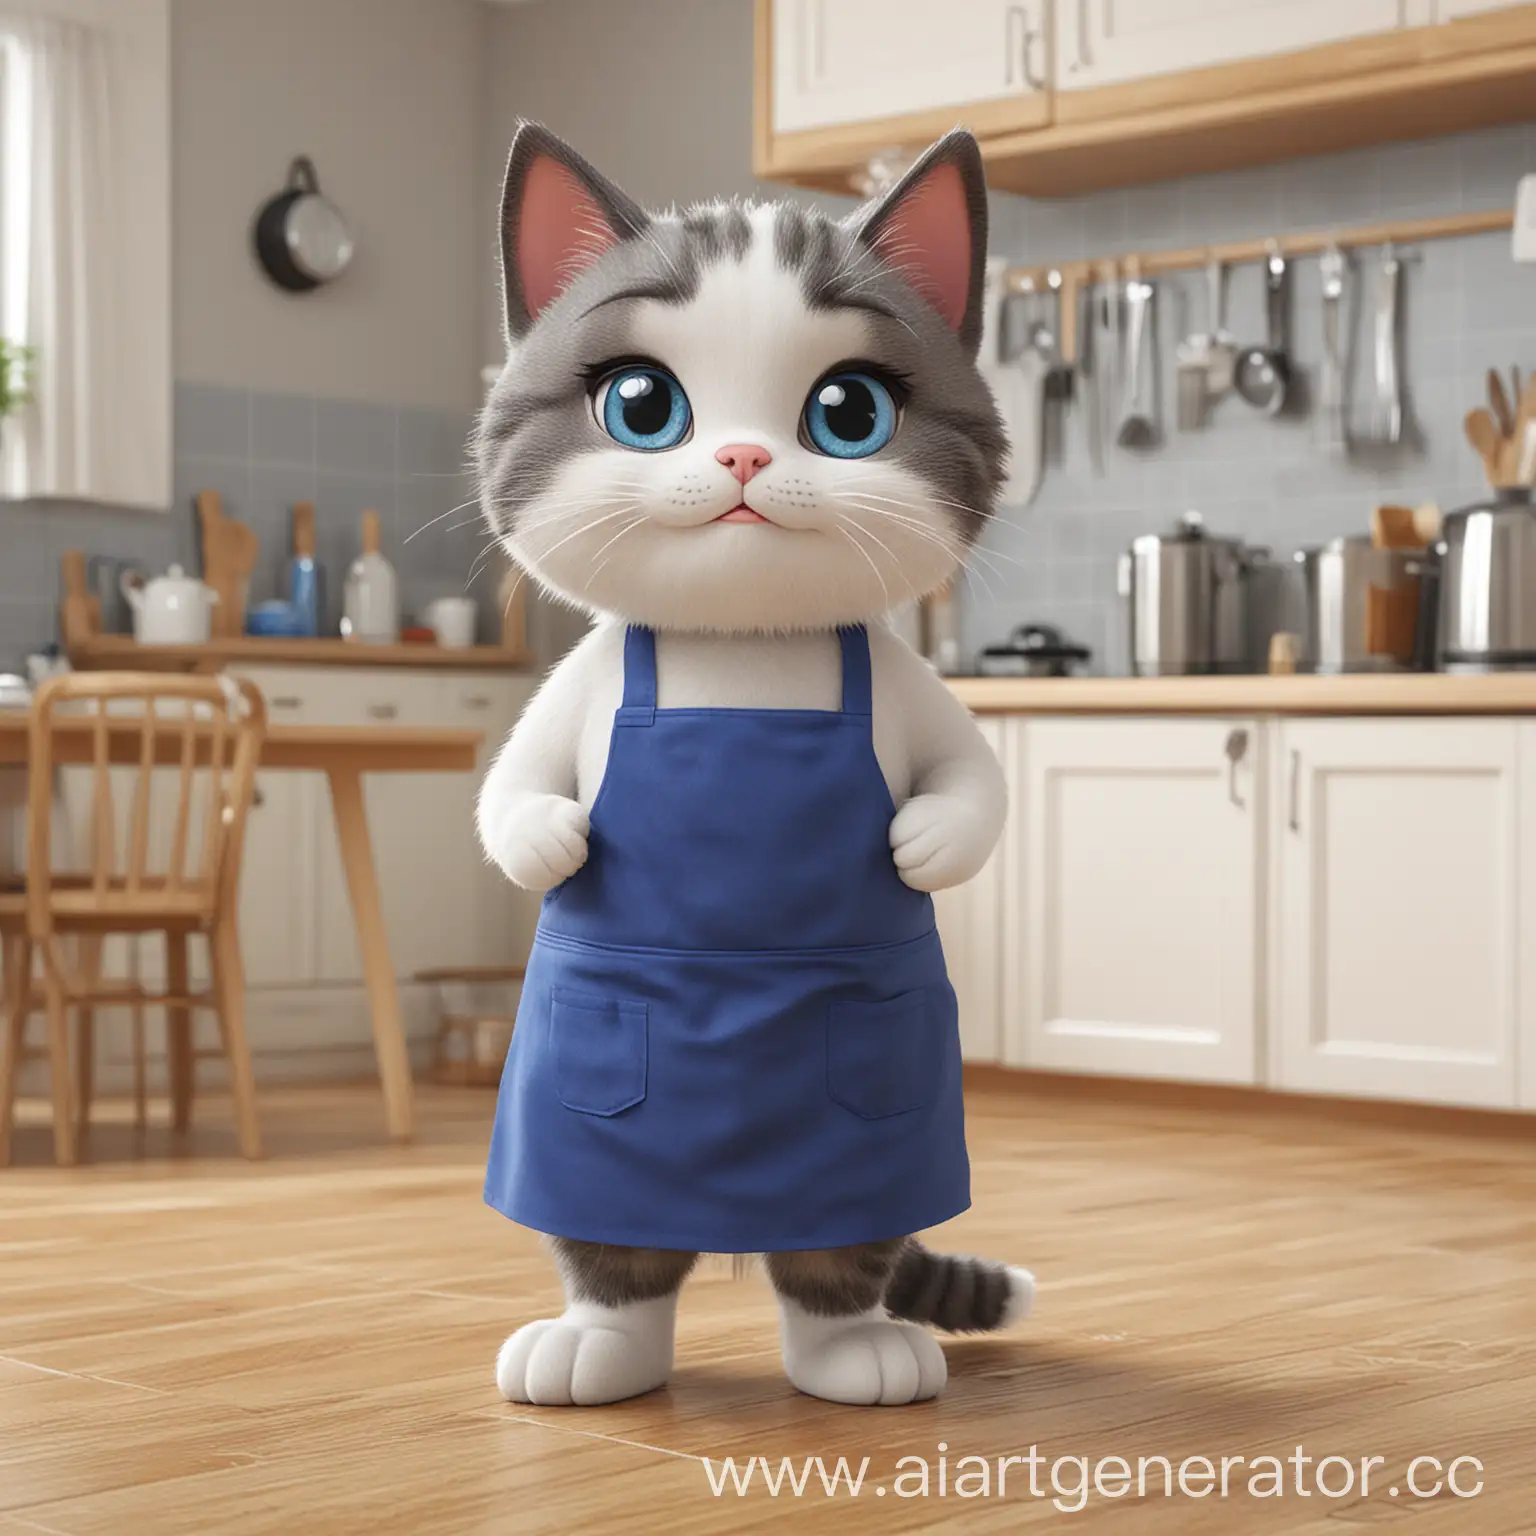 Adorable-Cartoon-Cat-Cleaning-in-Kitchen-with-Blue-Apron